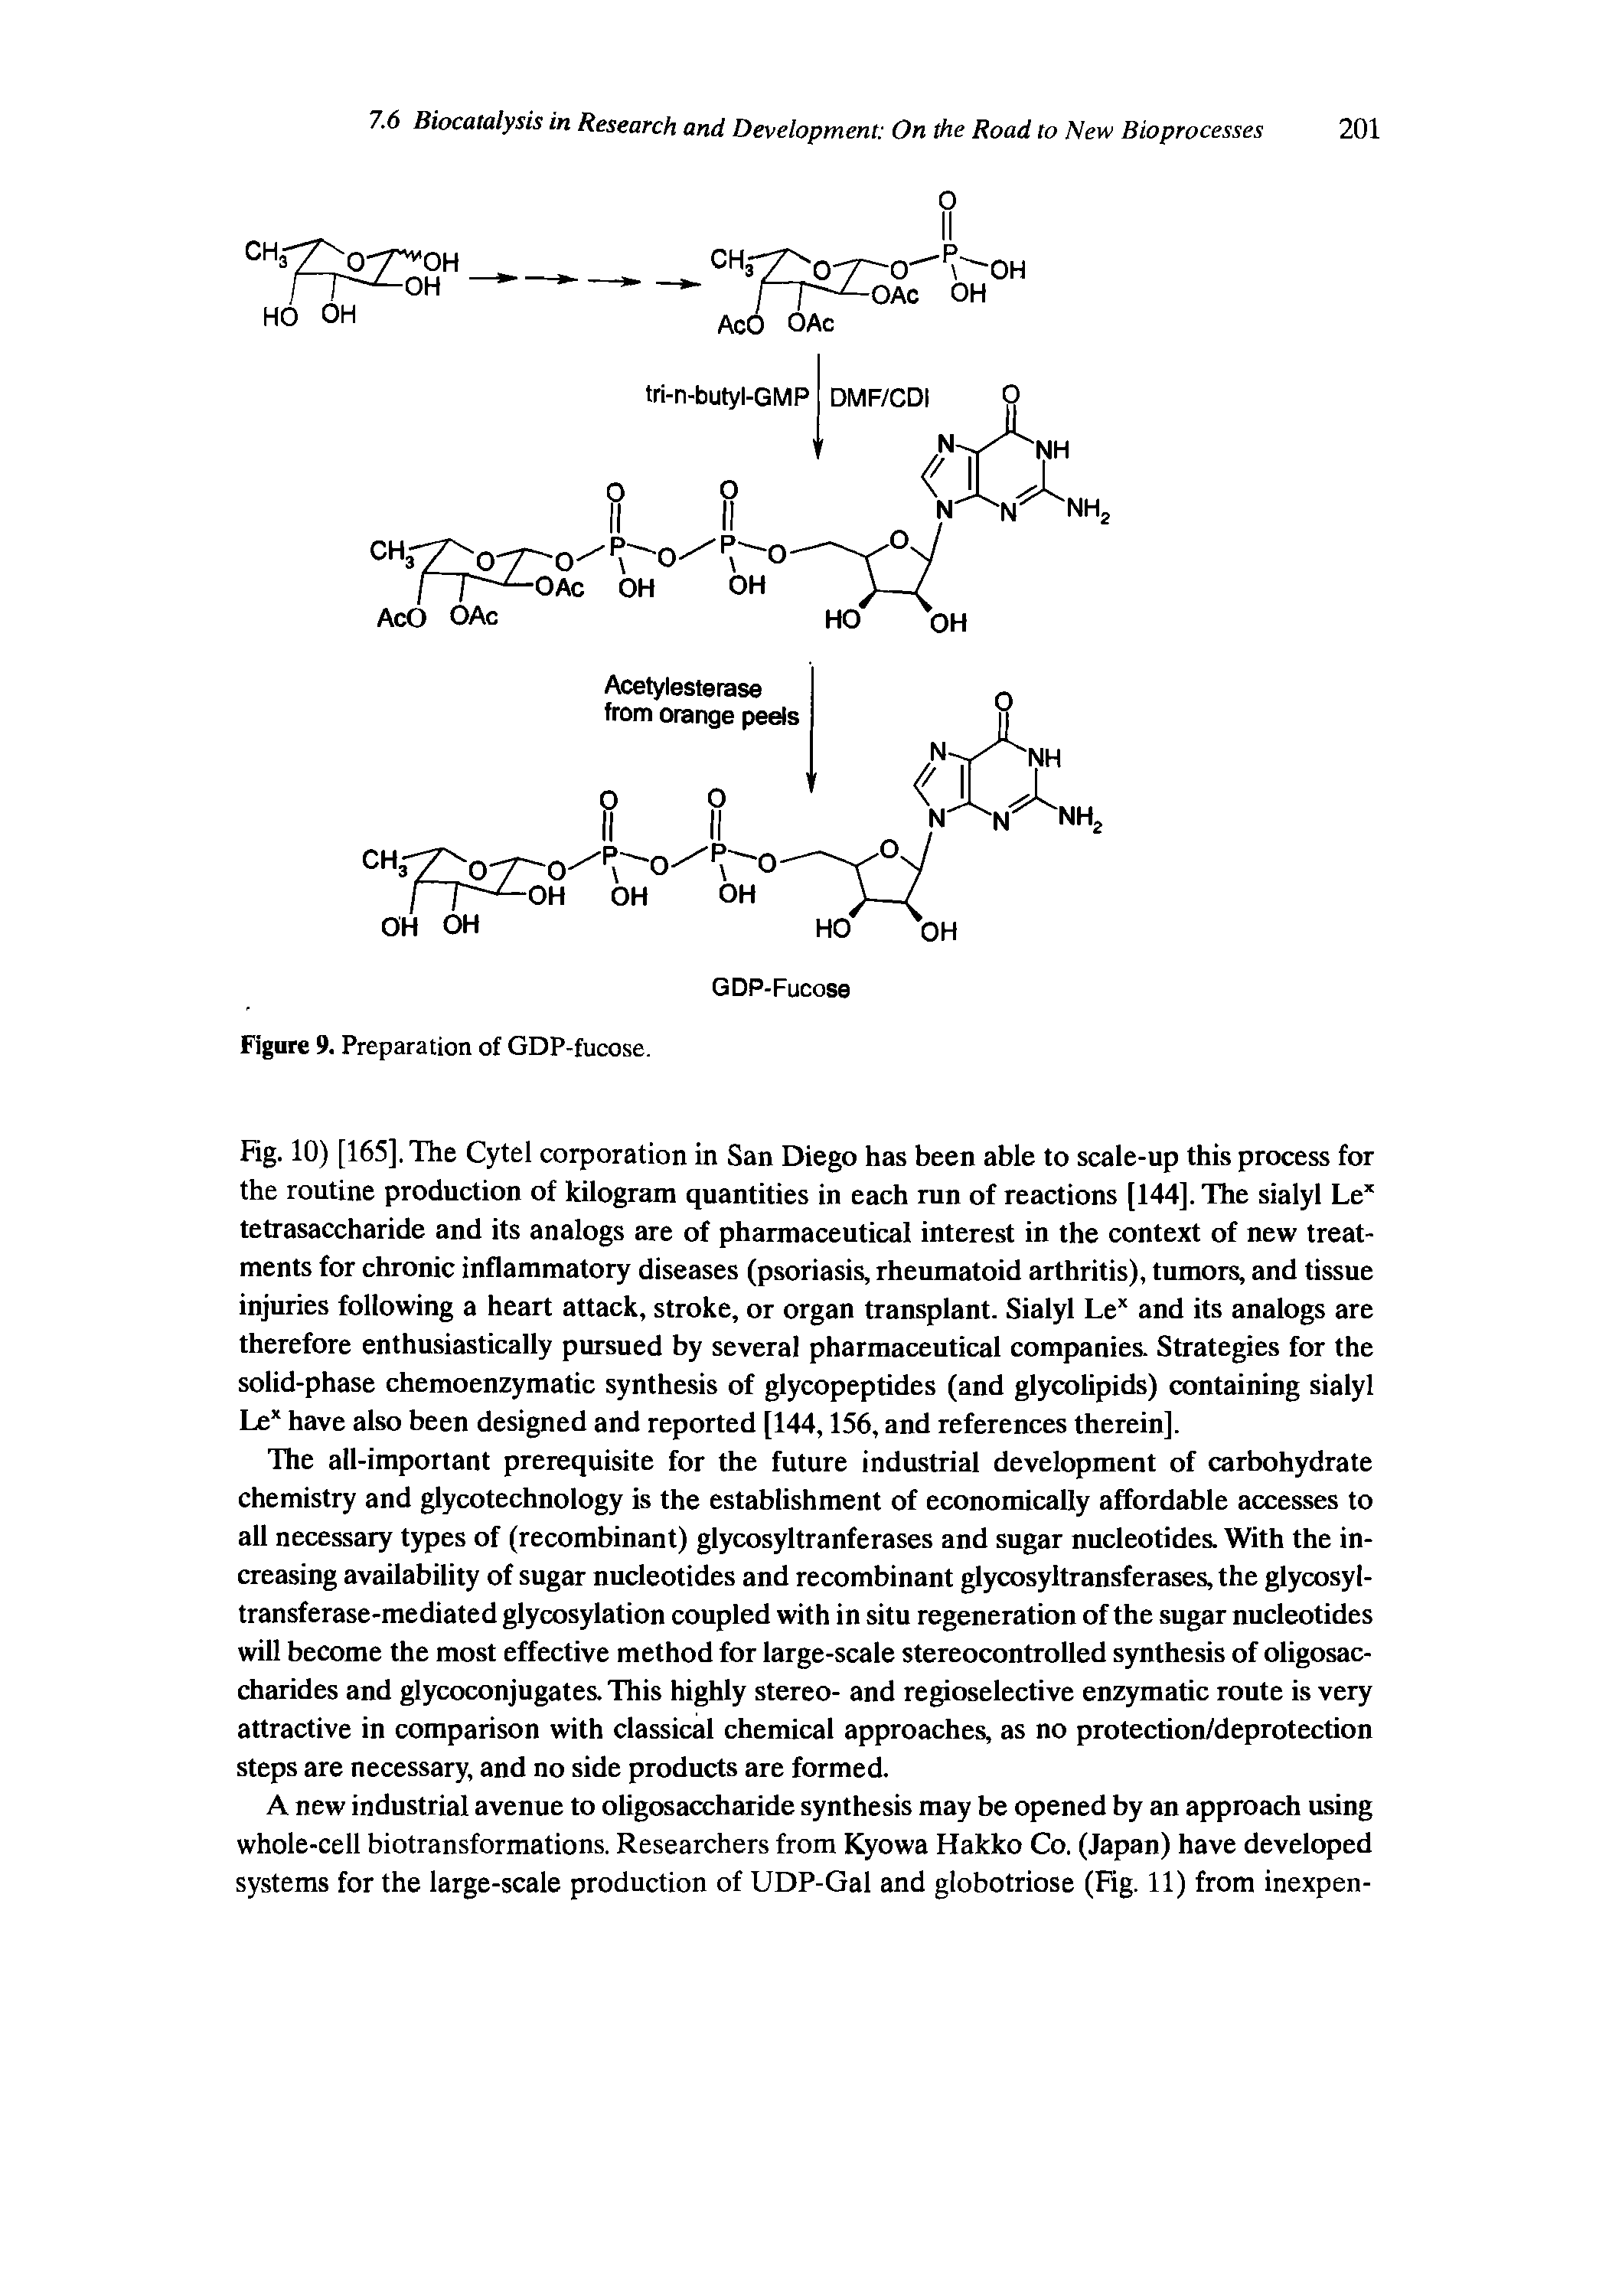 Fig. 10) [165], The Cytel corporation in San Diego has been able to scale-up this process for the routine production of kilogram quantities in each run of reactions [144]. The sialyl Le tetrasaccharide and its analogs are of pharmaceutical interest in the context of new treatments for chronic inflammatory diseases (psoriasis, rheumatoid arthritis), tumors, and tissue injuries following a heart attack, stroke, or organ transplant. Sialyl Lex and its analogs are therefore enthusiastically pursued by several pharmaceutical companies. Strategies for the solid-phase chemoenzymatic synthesis of glycopeptides (and glycolipids) containing sialyl Lex have also been designed and reported [144,156, and references therein].